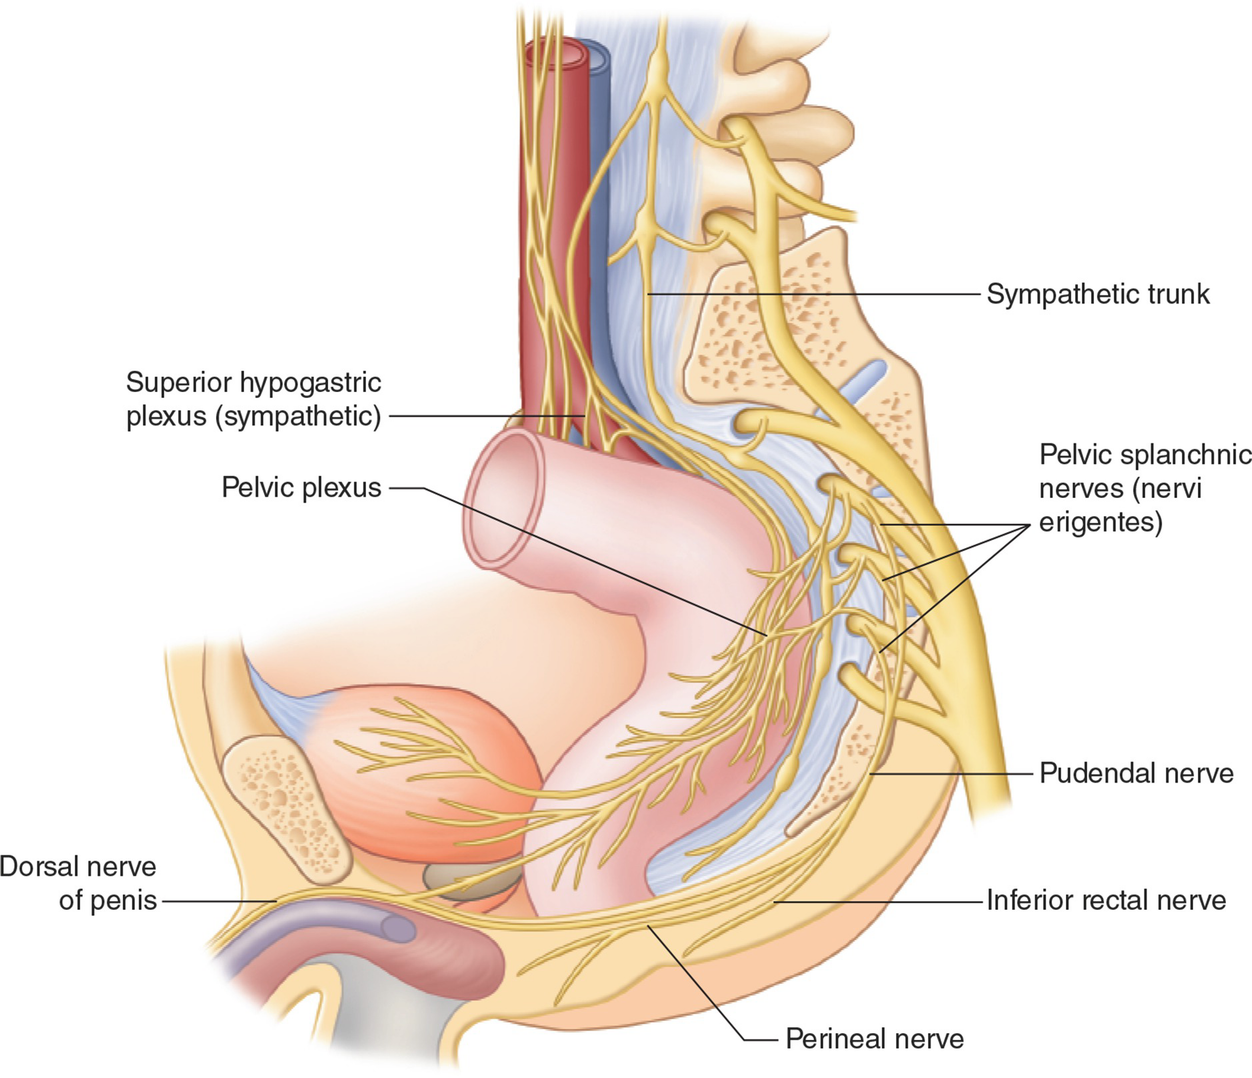 Anorectal Anatomy and Physiology | SpringerLink